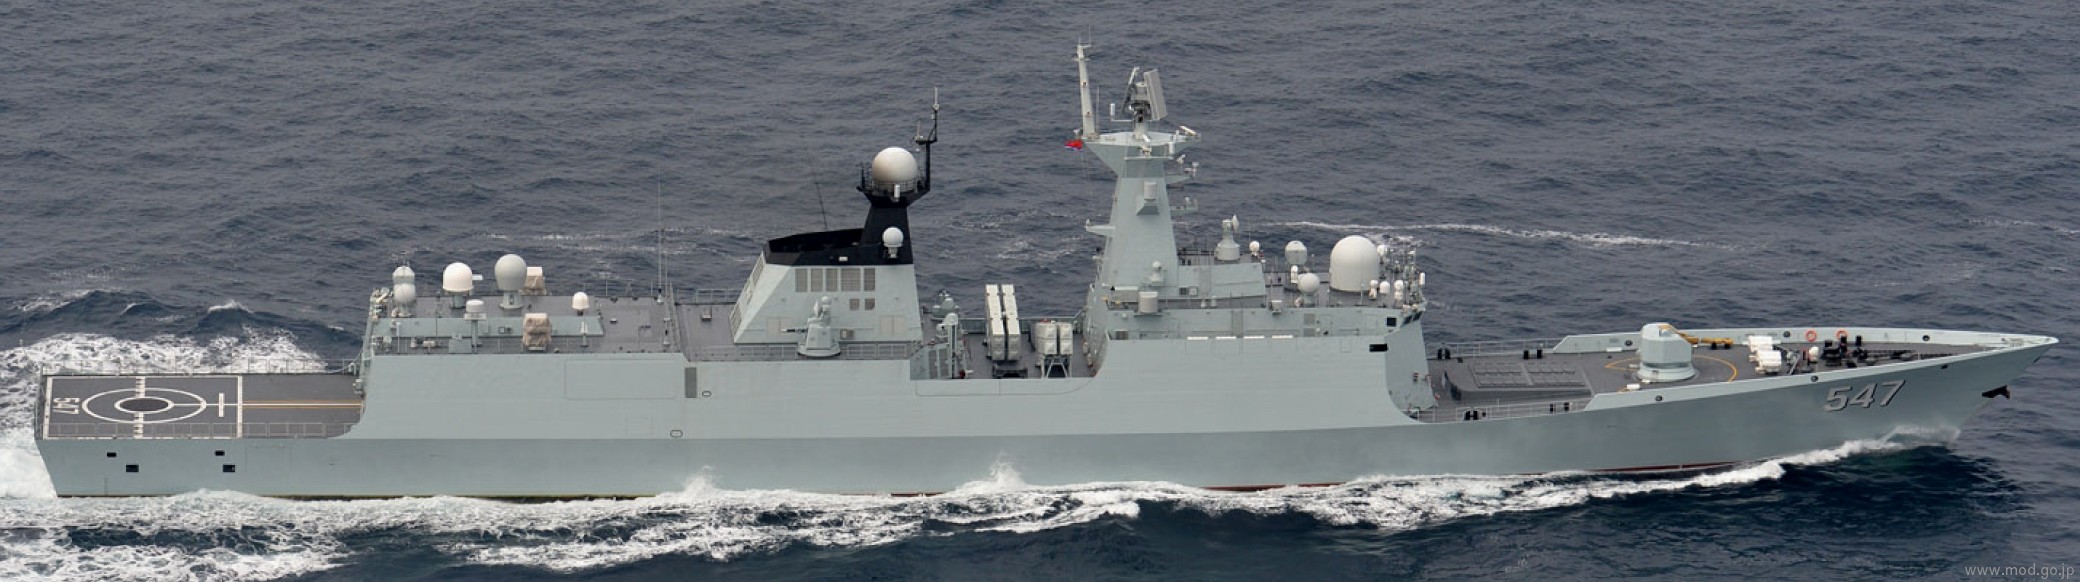 ffg-547 plans linyi type 054a jiangkai ii class guided missile frigate china people's liberation army navy 05